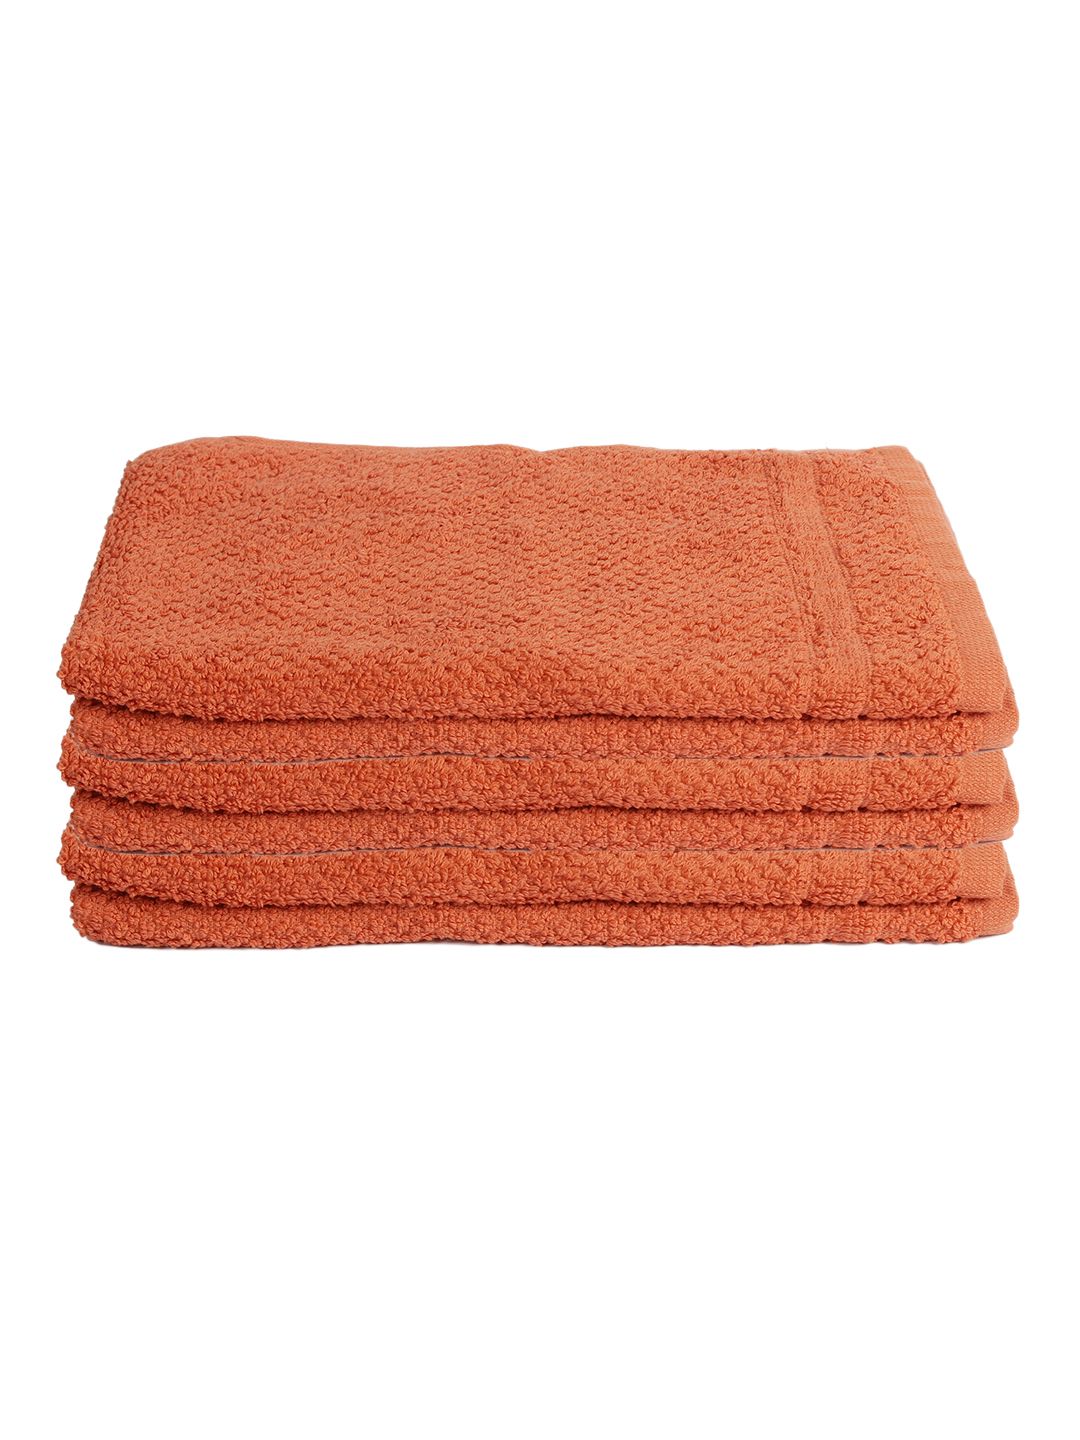 Softweave Set Of 6 Orange Solid 350 GSM Cotton Hand Towels Price in India